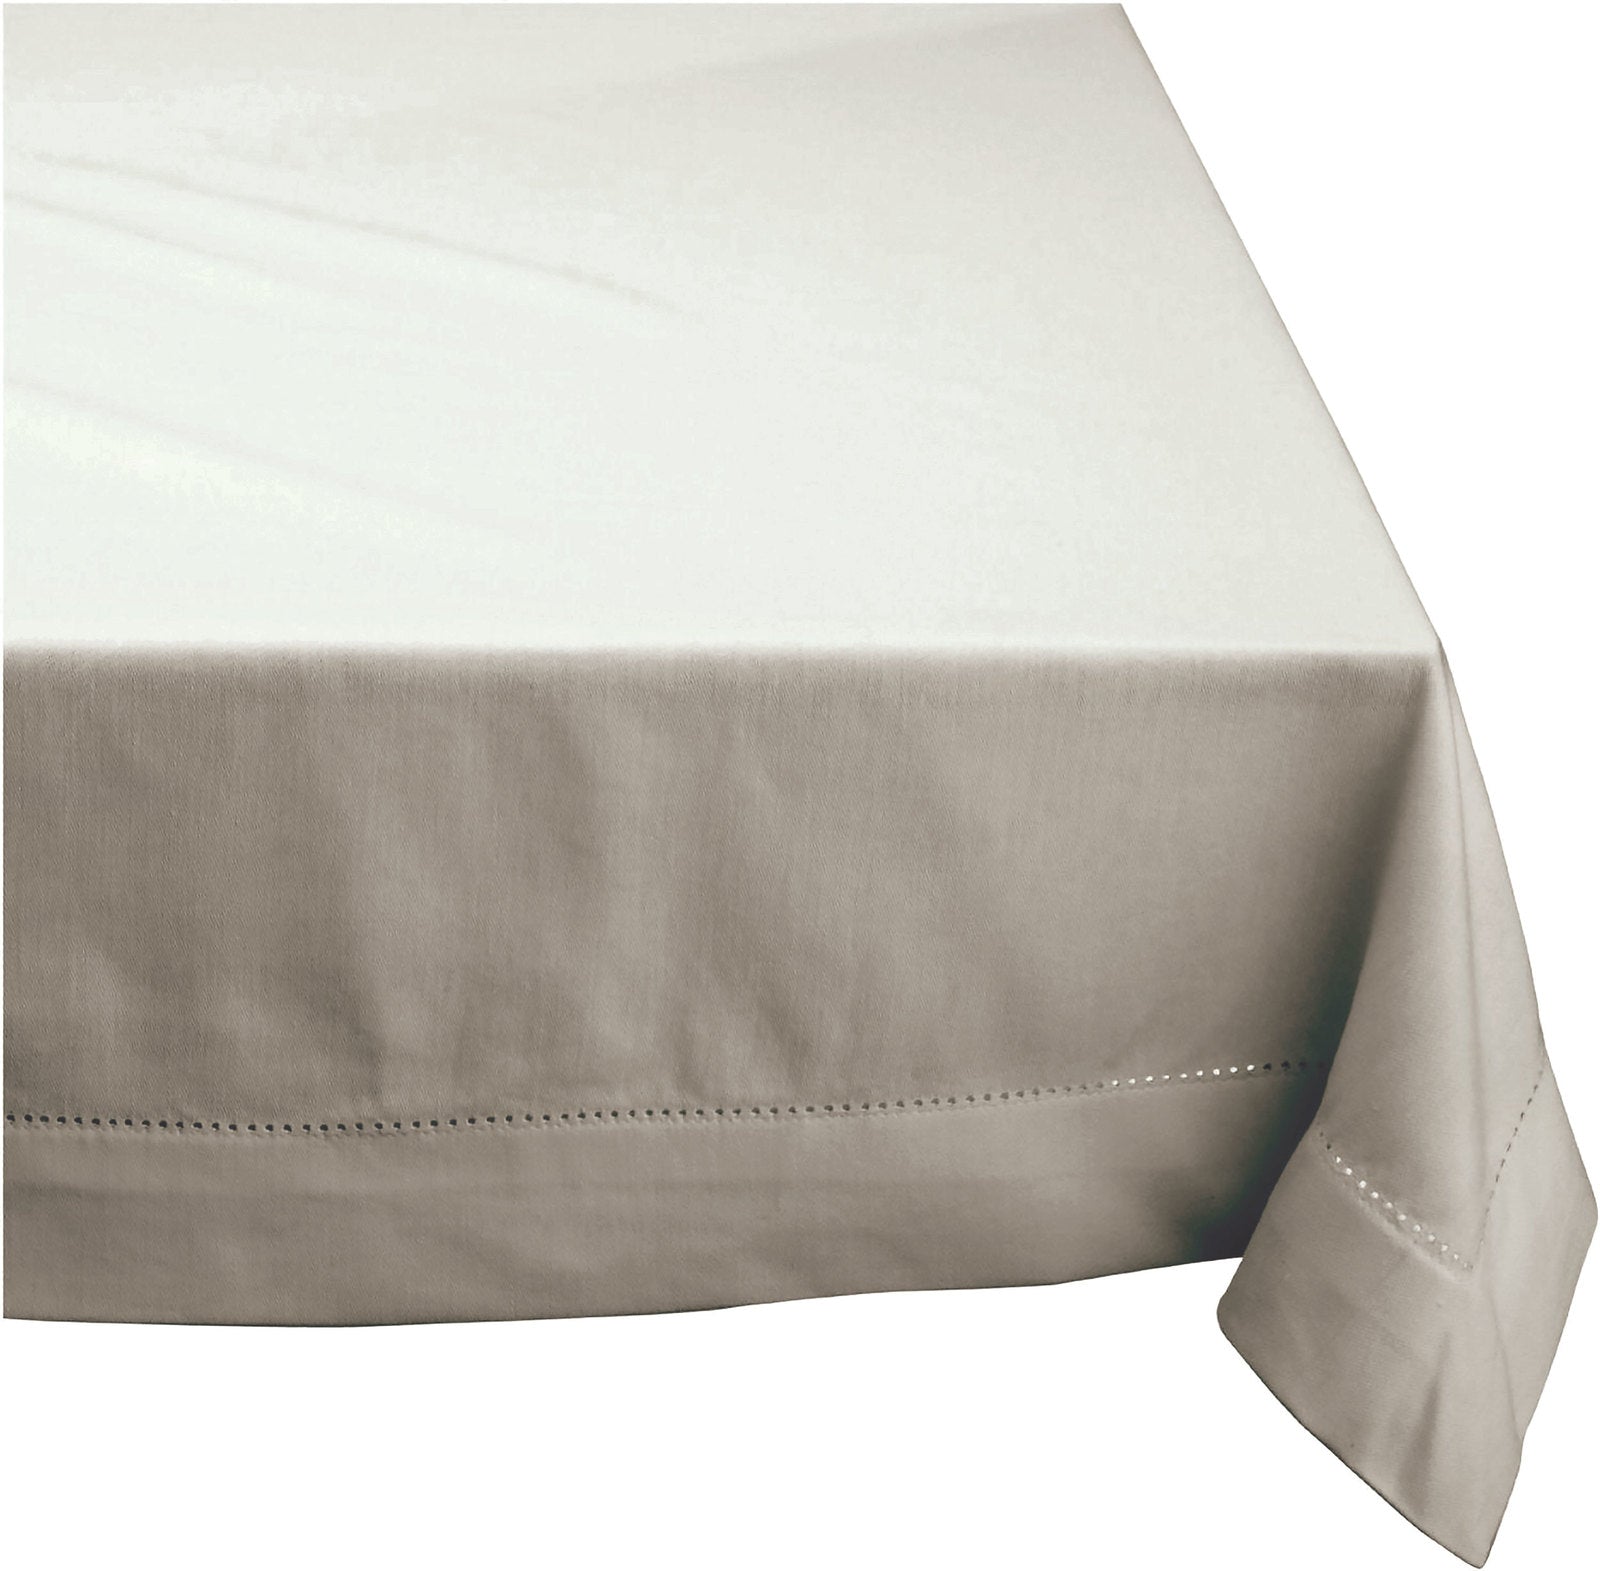 Elegant Hemstitch Tablecloth - 100% Cotton - 180cm Round in Oatmeal